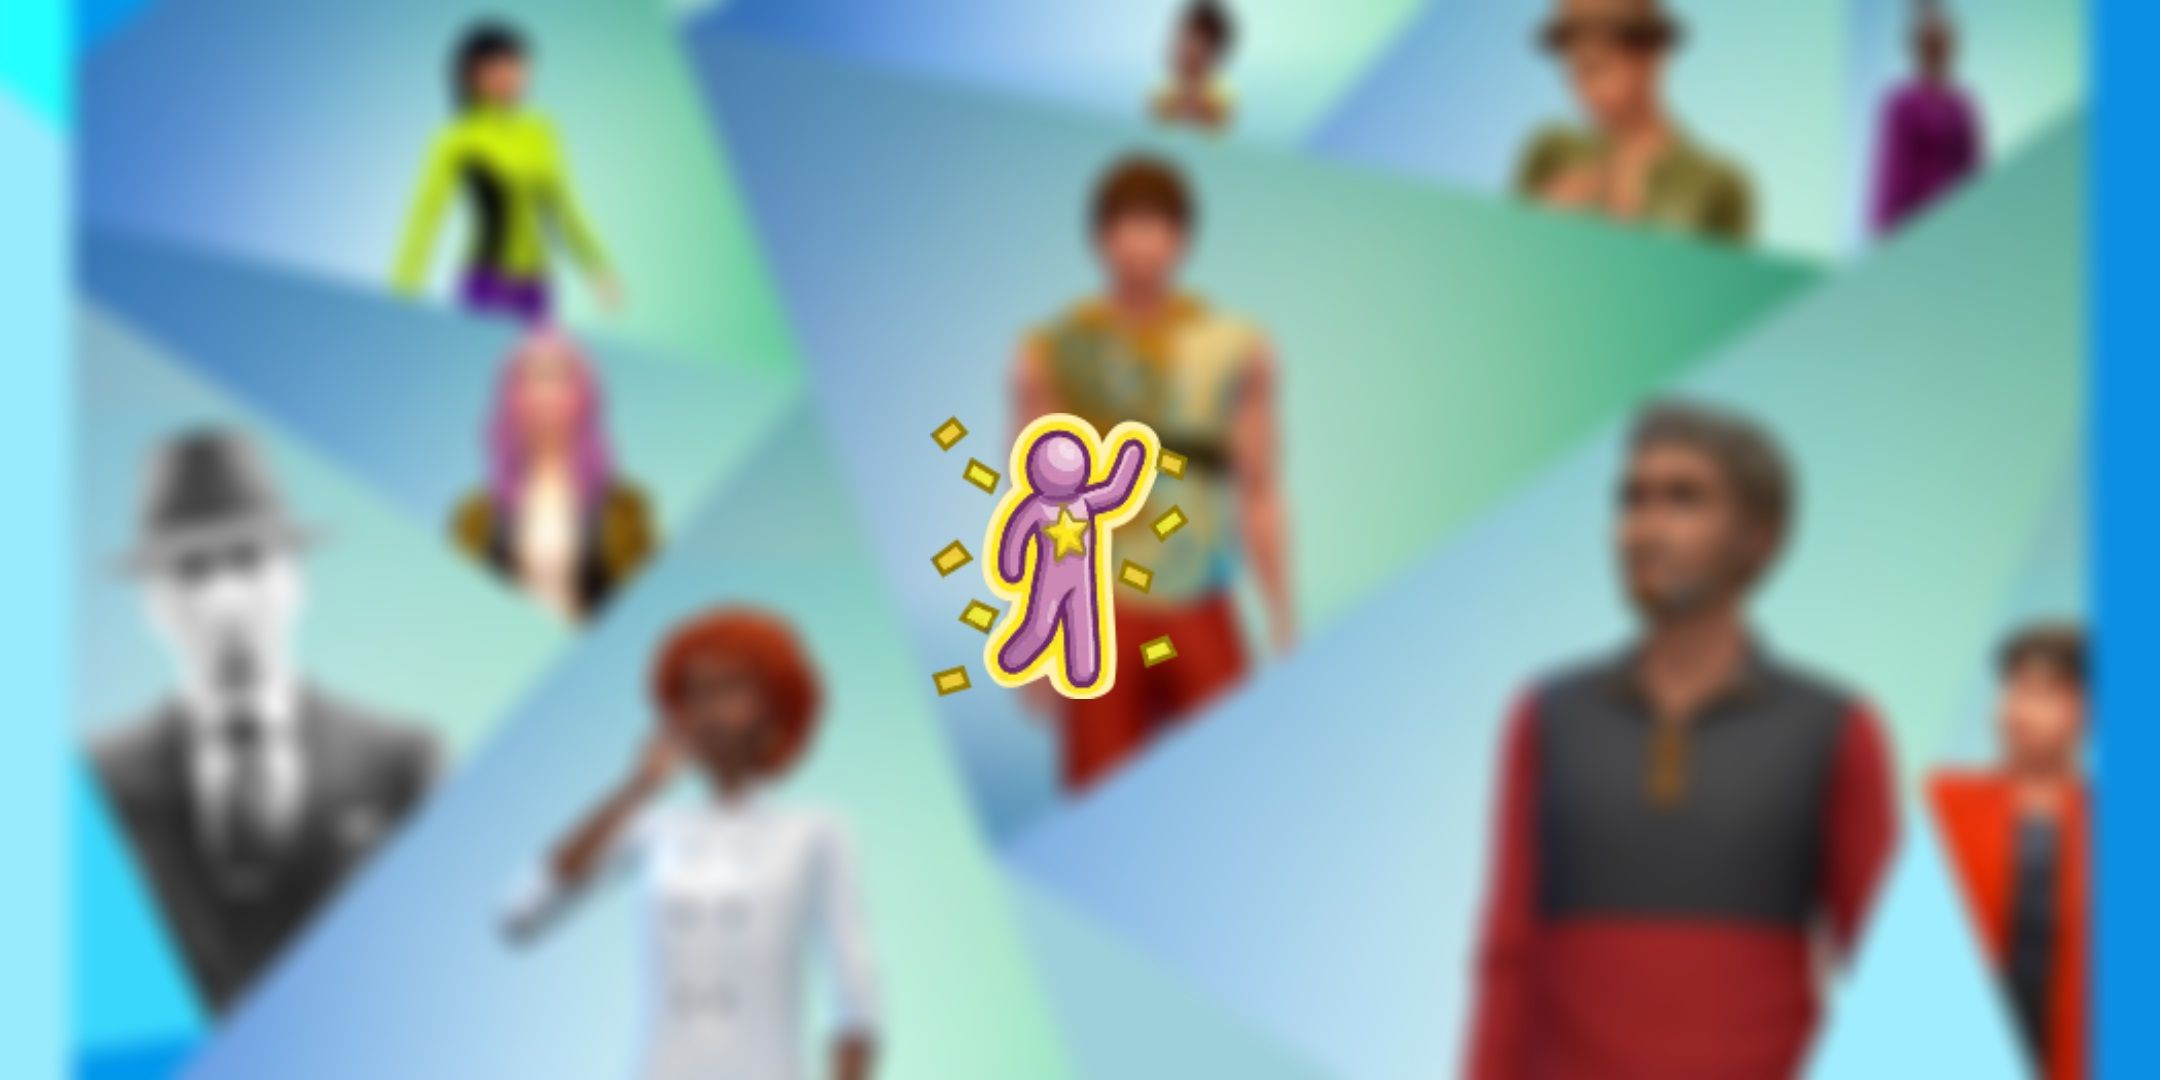 The Star Treatment perk in The Sims 4